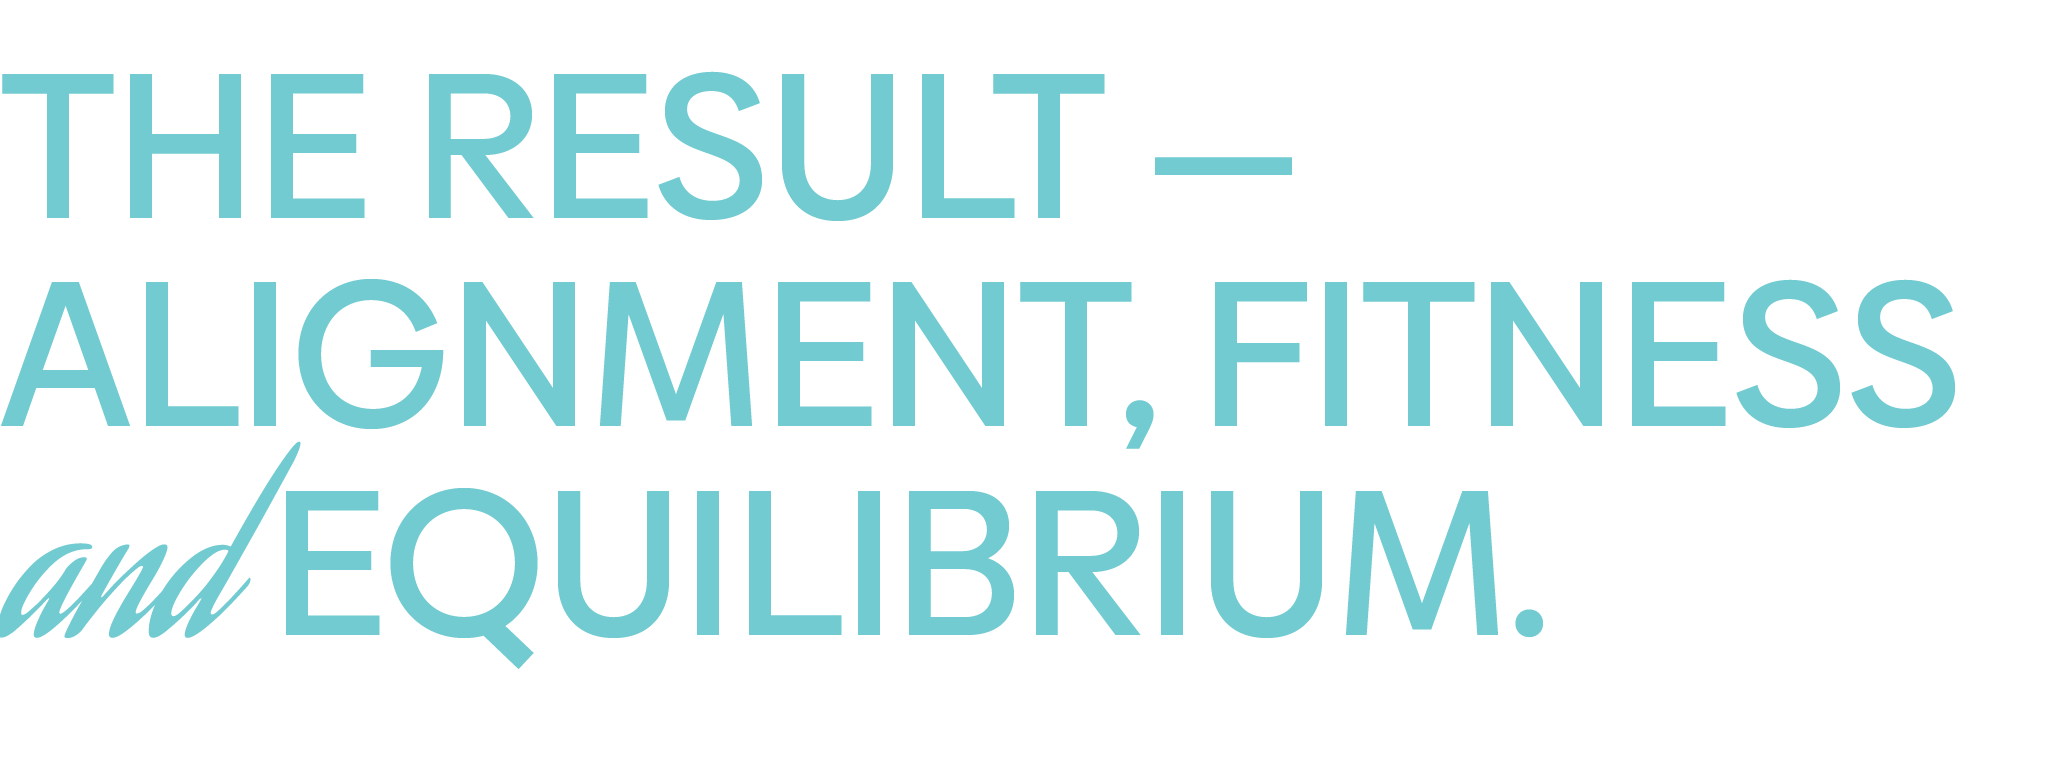 THE RESULT — ALIGNMENT, FITNESS and EQUILIBRIUM.